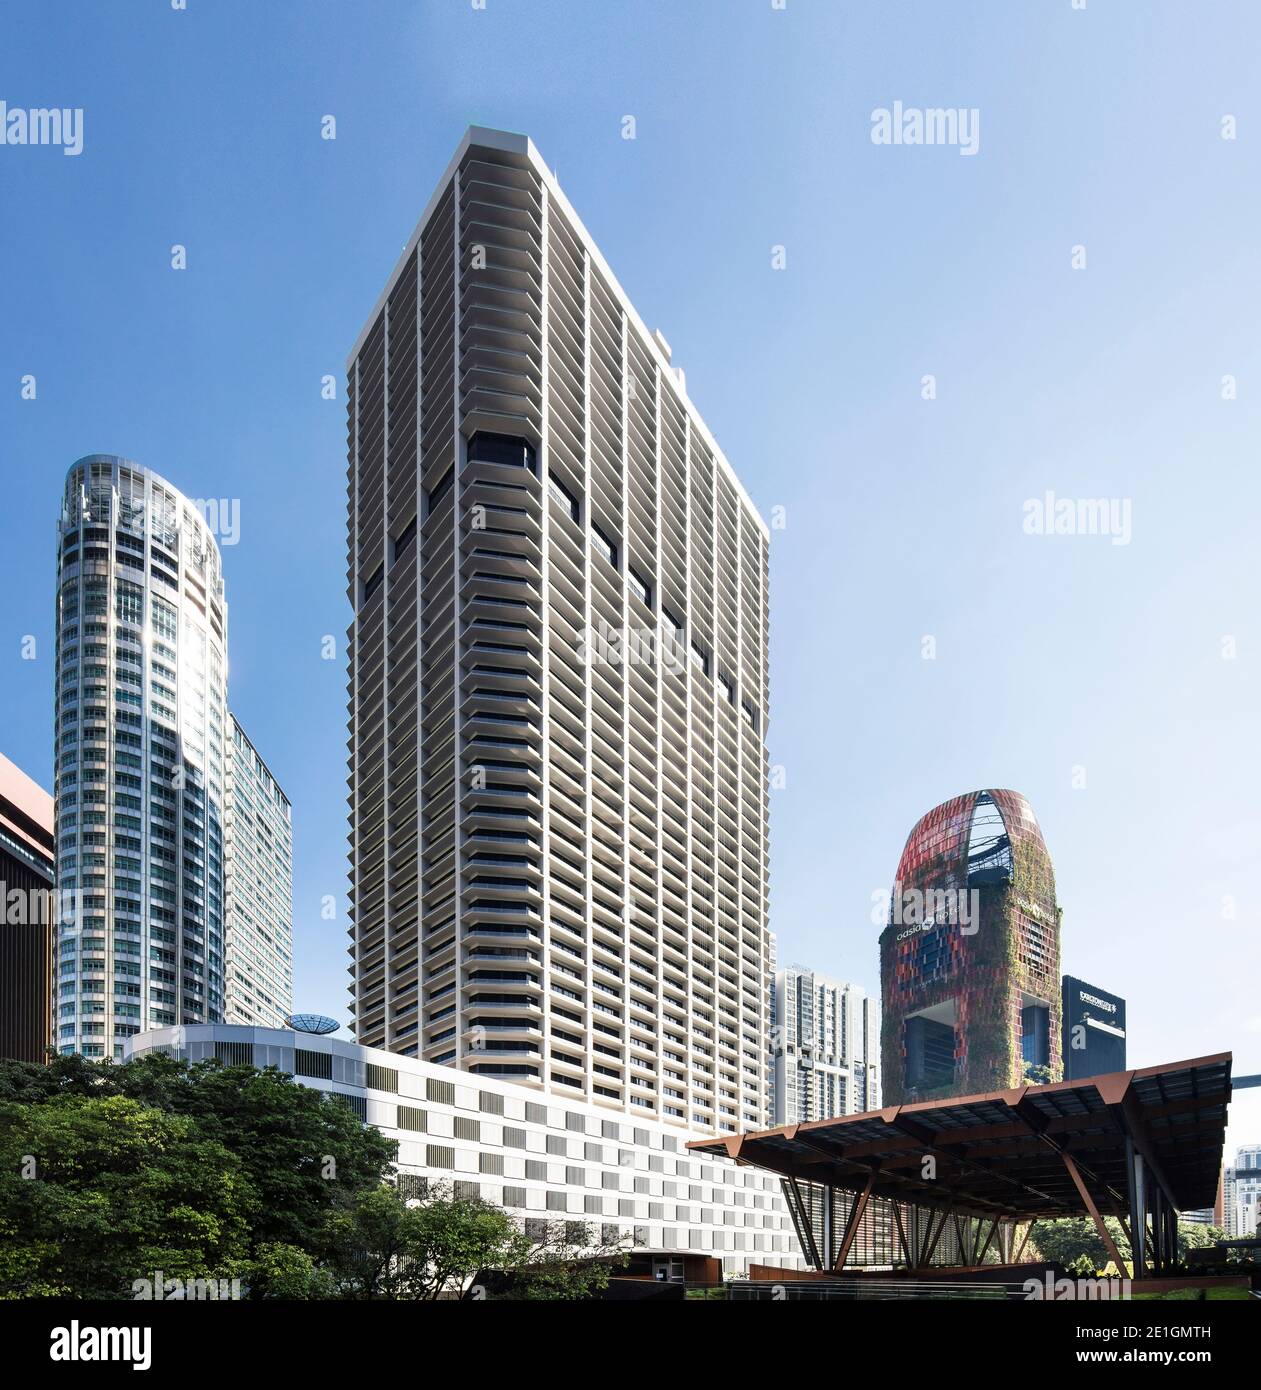 Exterior view of International Plaza, a pioneering mixed-use development in Singapore's CBD in the 1970s. Stock Photo